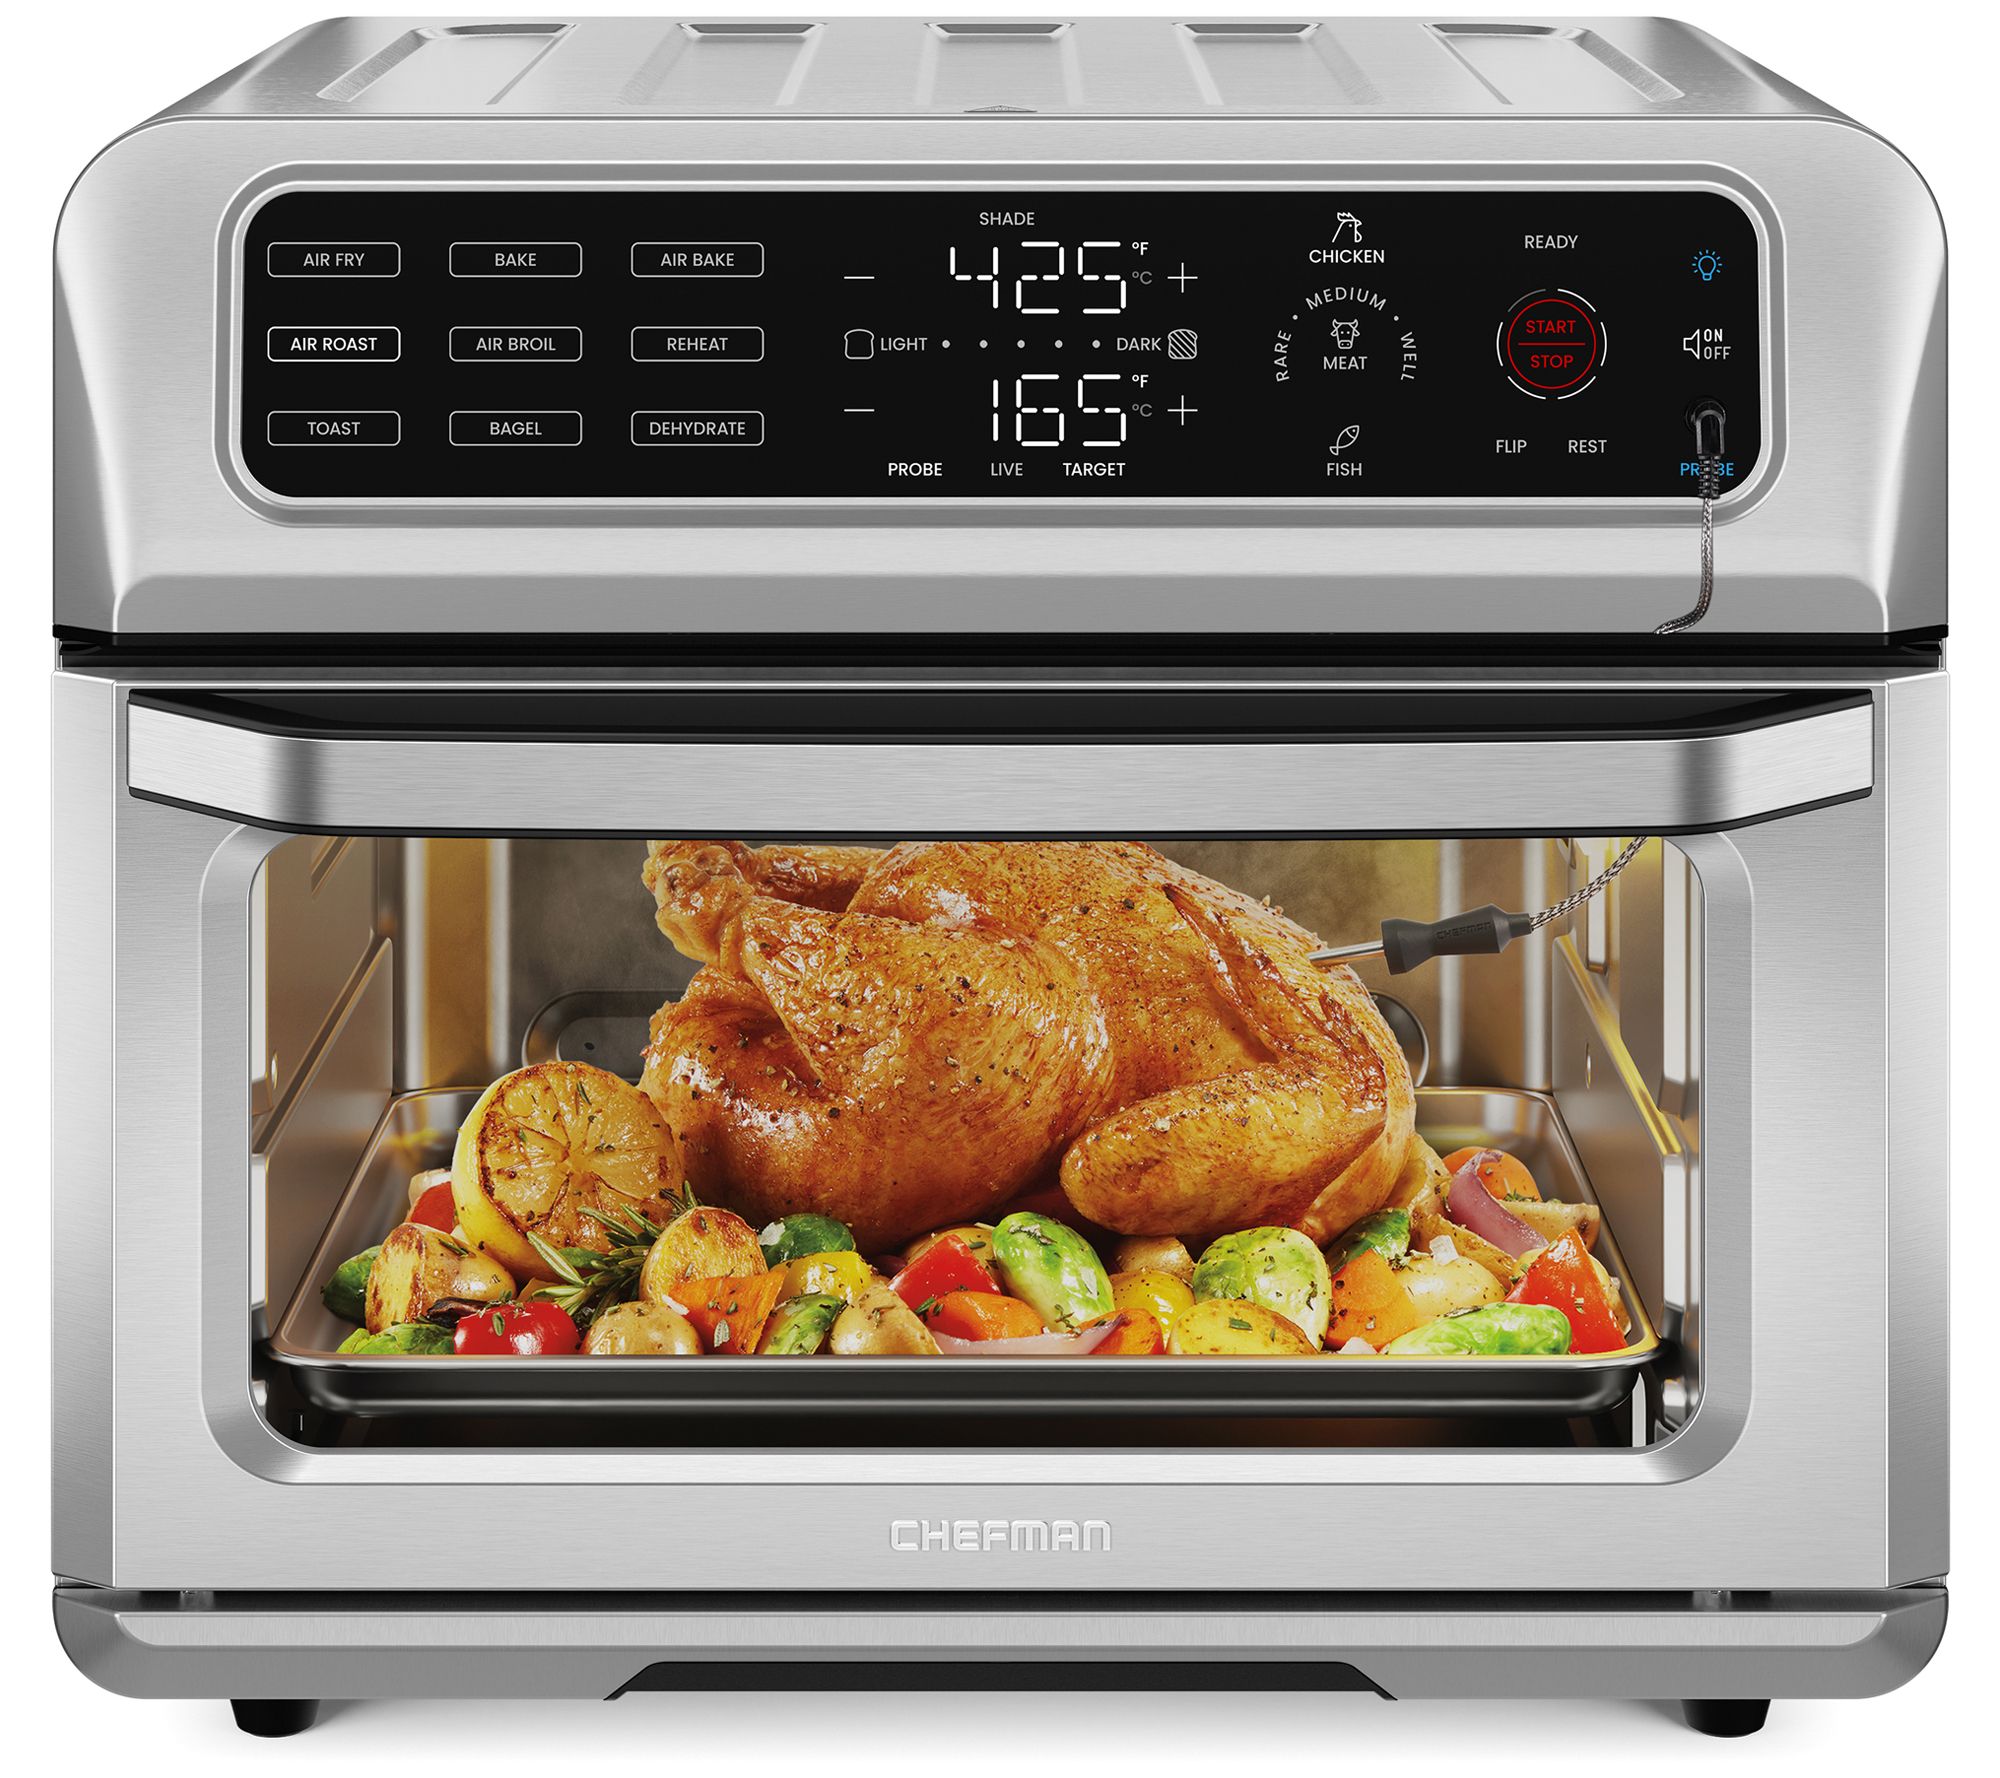 Dreo Air Fryer, 4 Quart Hot Oven Cooker with, 9 Cooking Functions